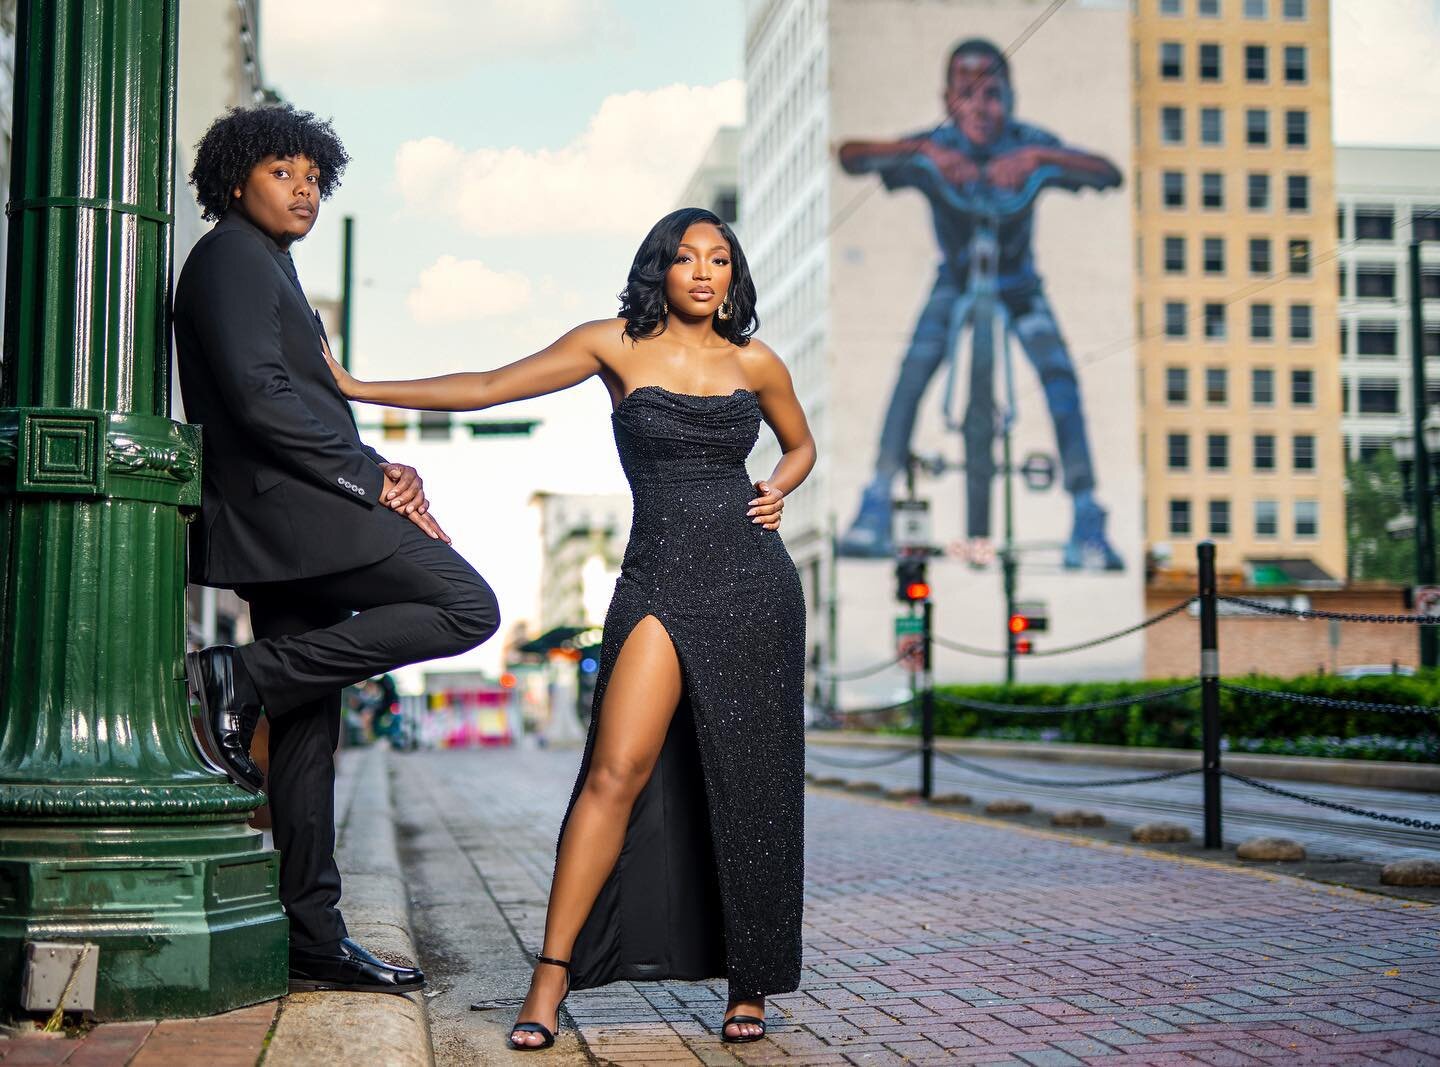 Moments X Winfreys.
.
.
.
.
.
In frame Chelsea &amp; Tra.
Behind the lens @breauxmoments